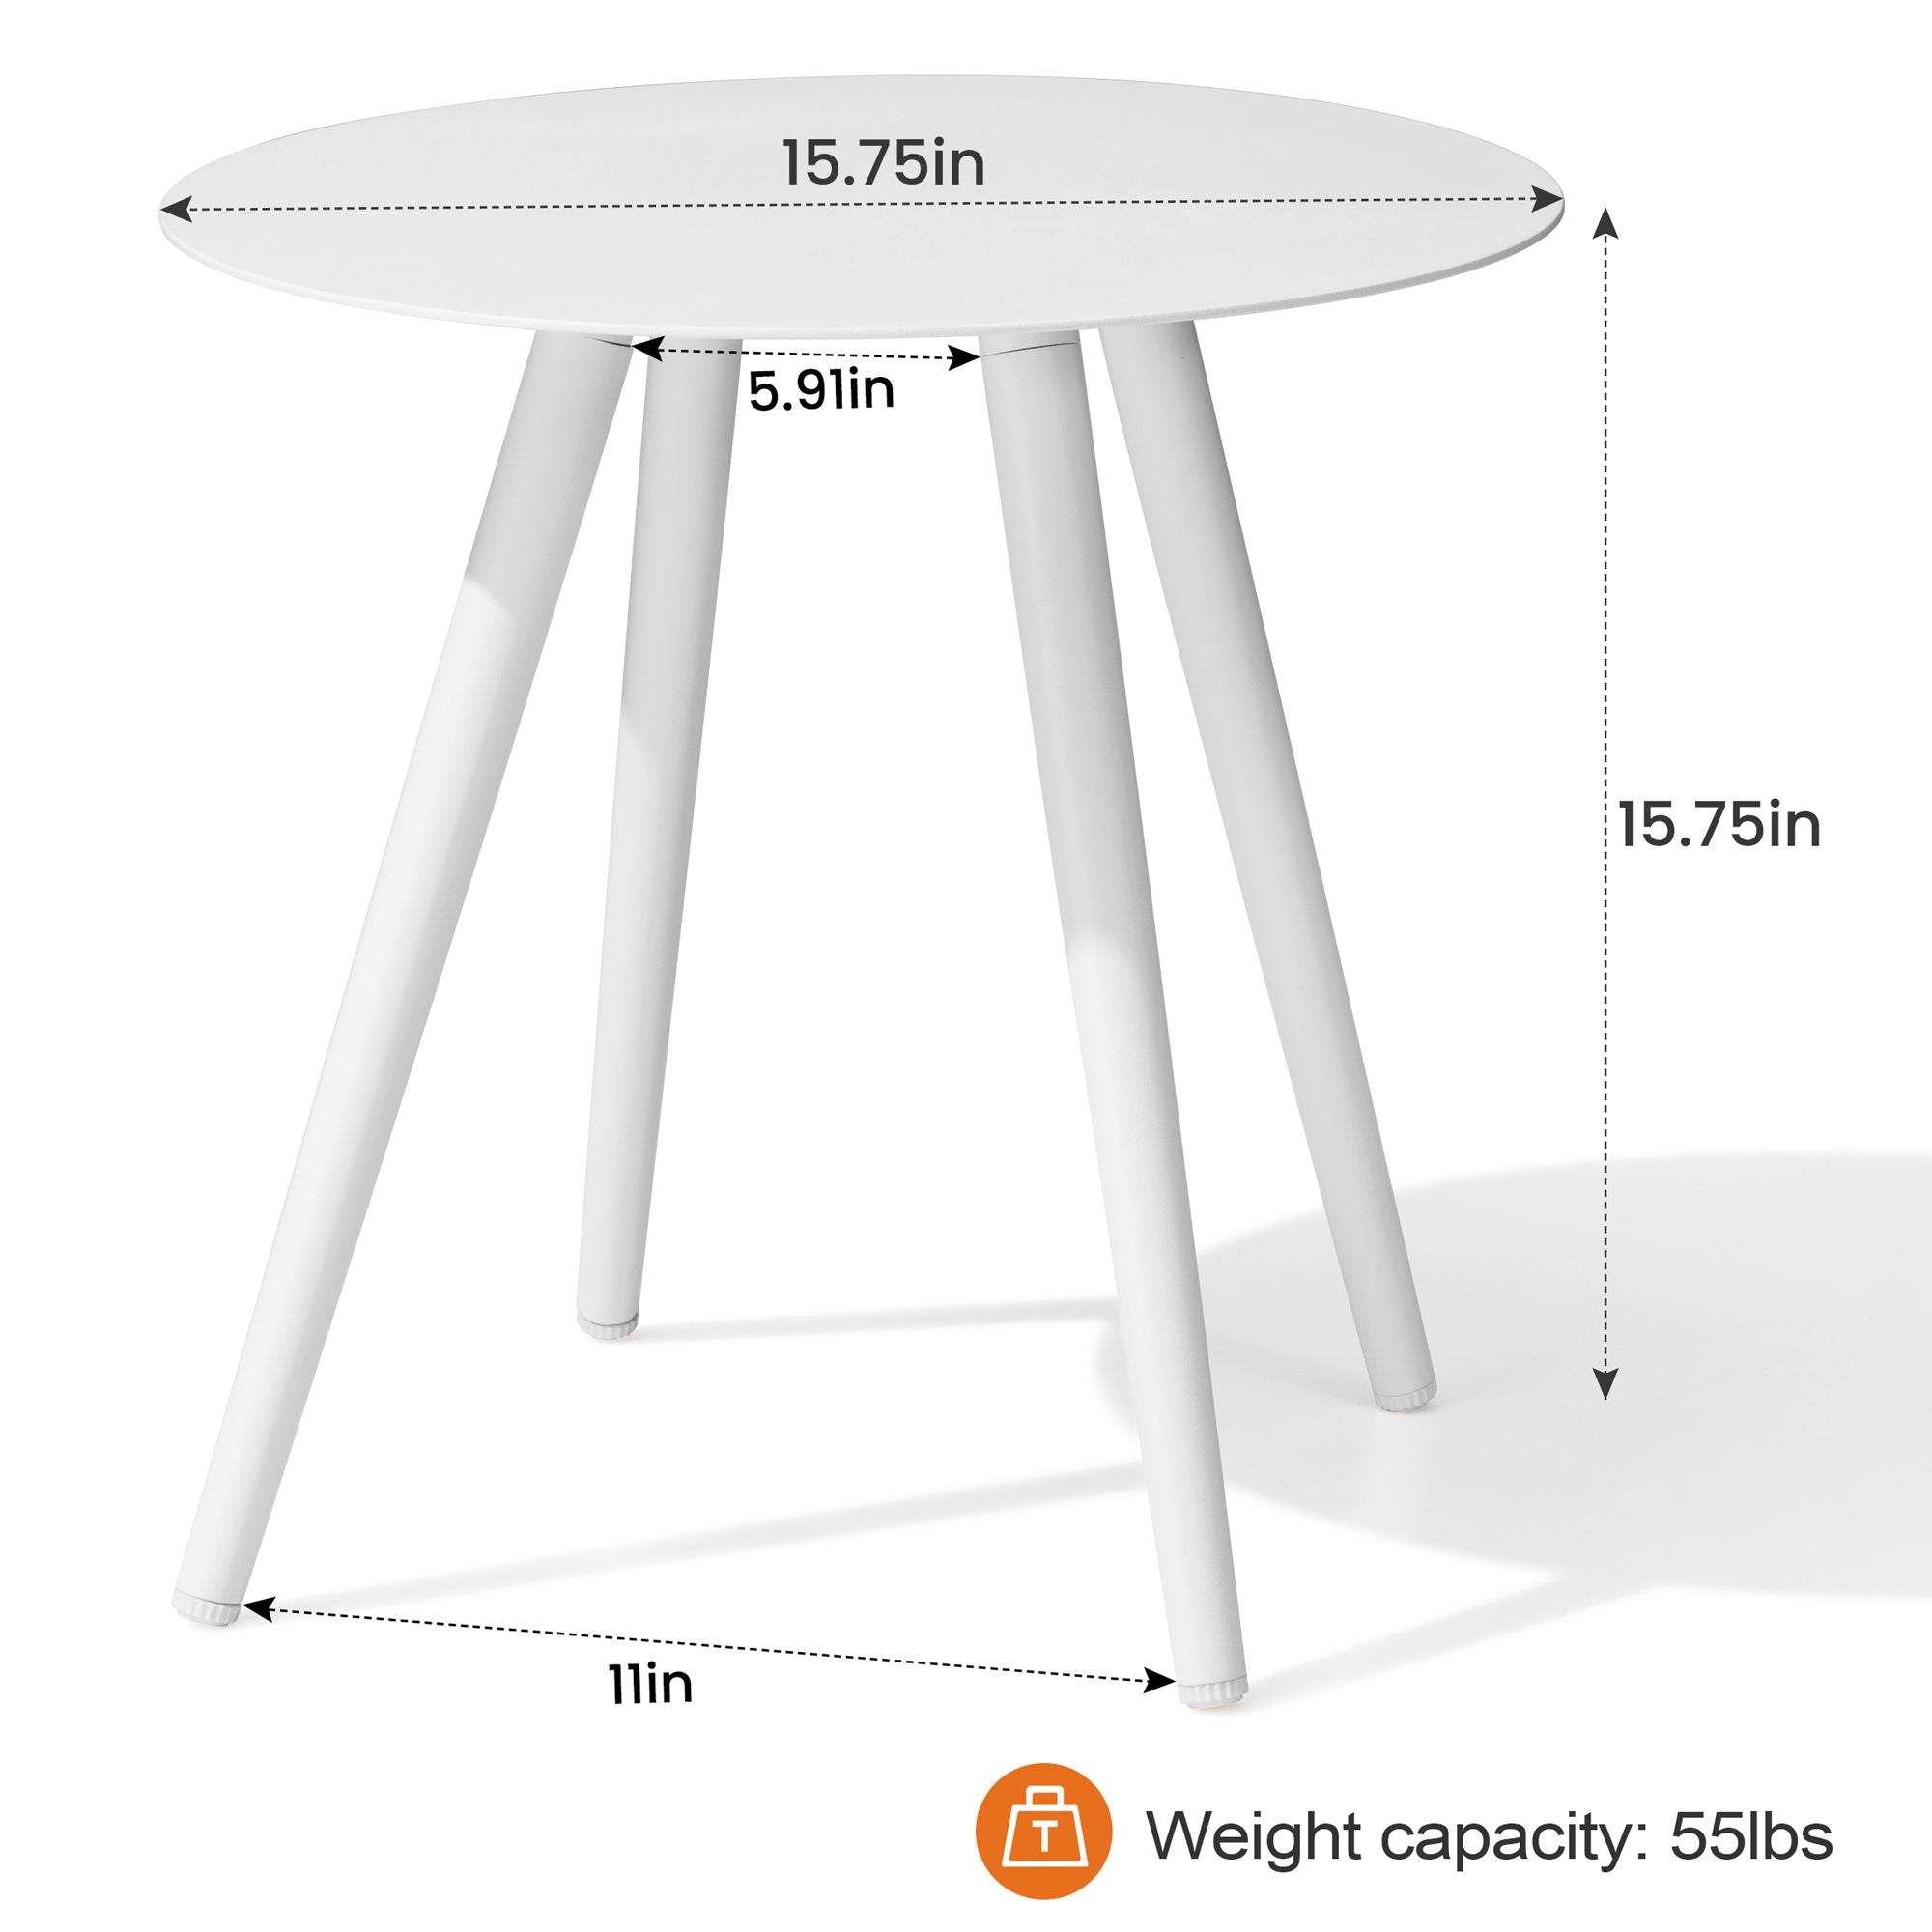 16" White Rounded Metal Outdoor Side Table